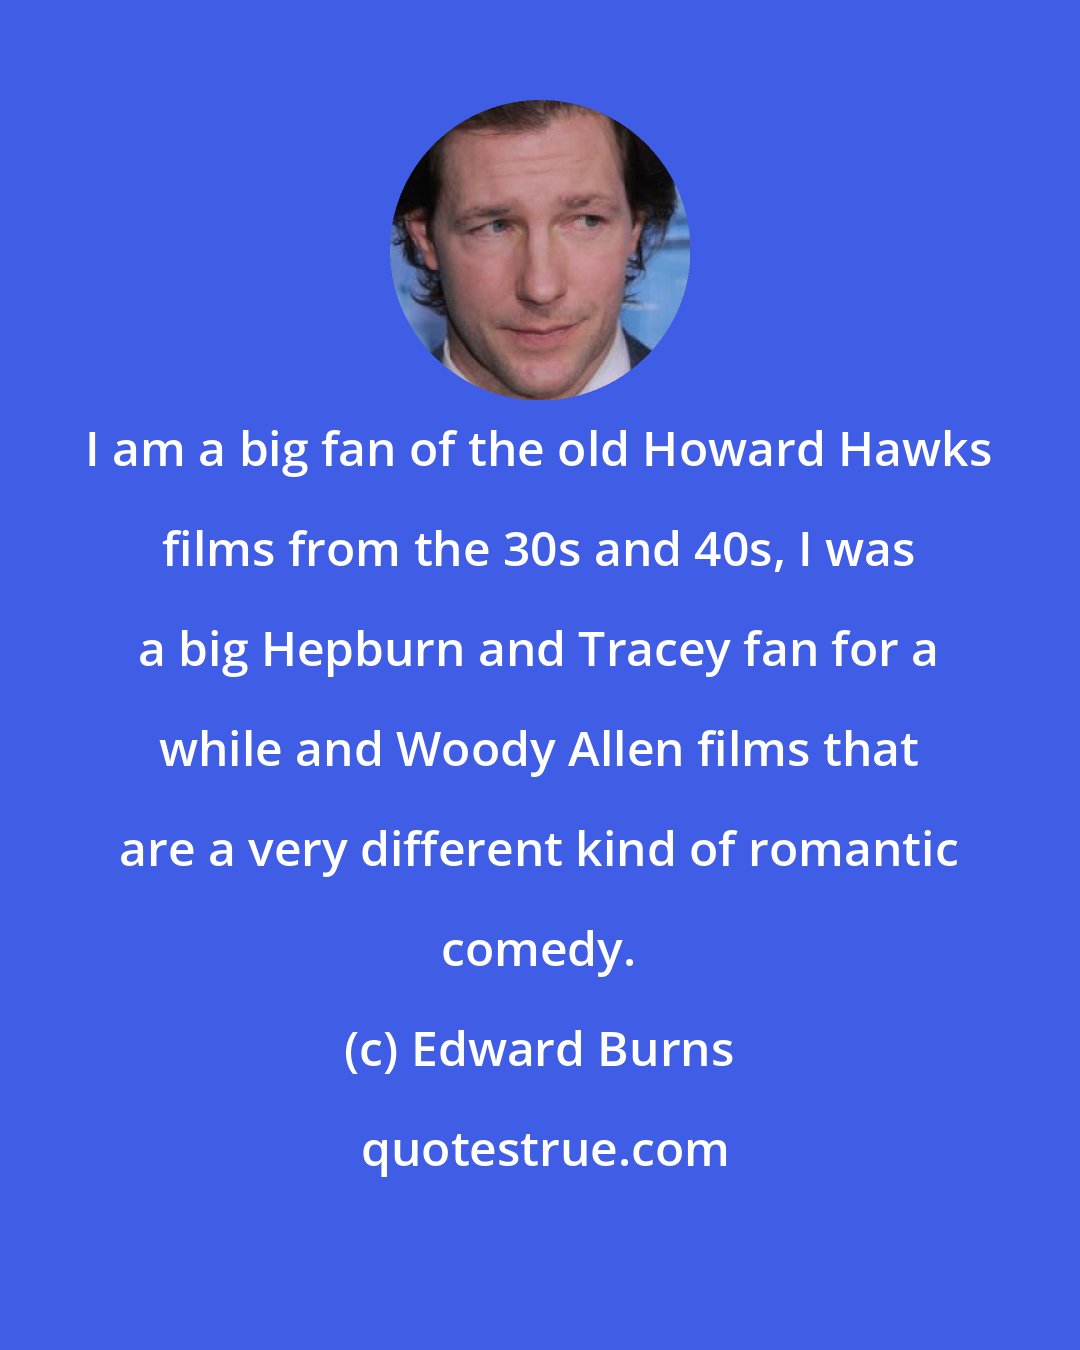 Edward Burns: I am a big fan of the old Howard Hawks films from the 30s and 40s, I was a big Hepburn and Tracey fan for a while and Woody Allen films that are a very different kind of romantic comedy.